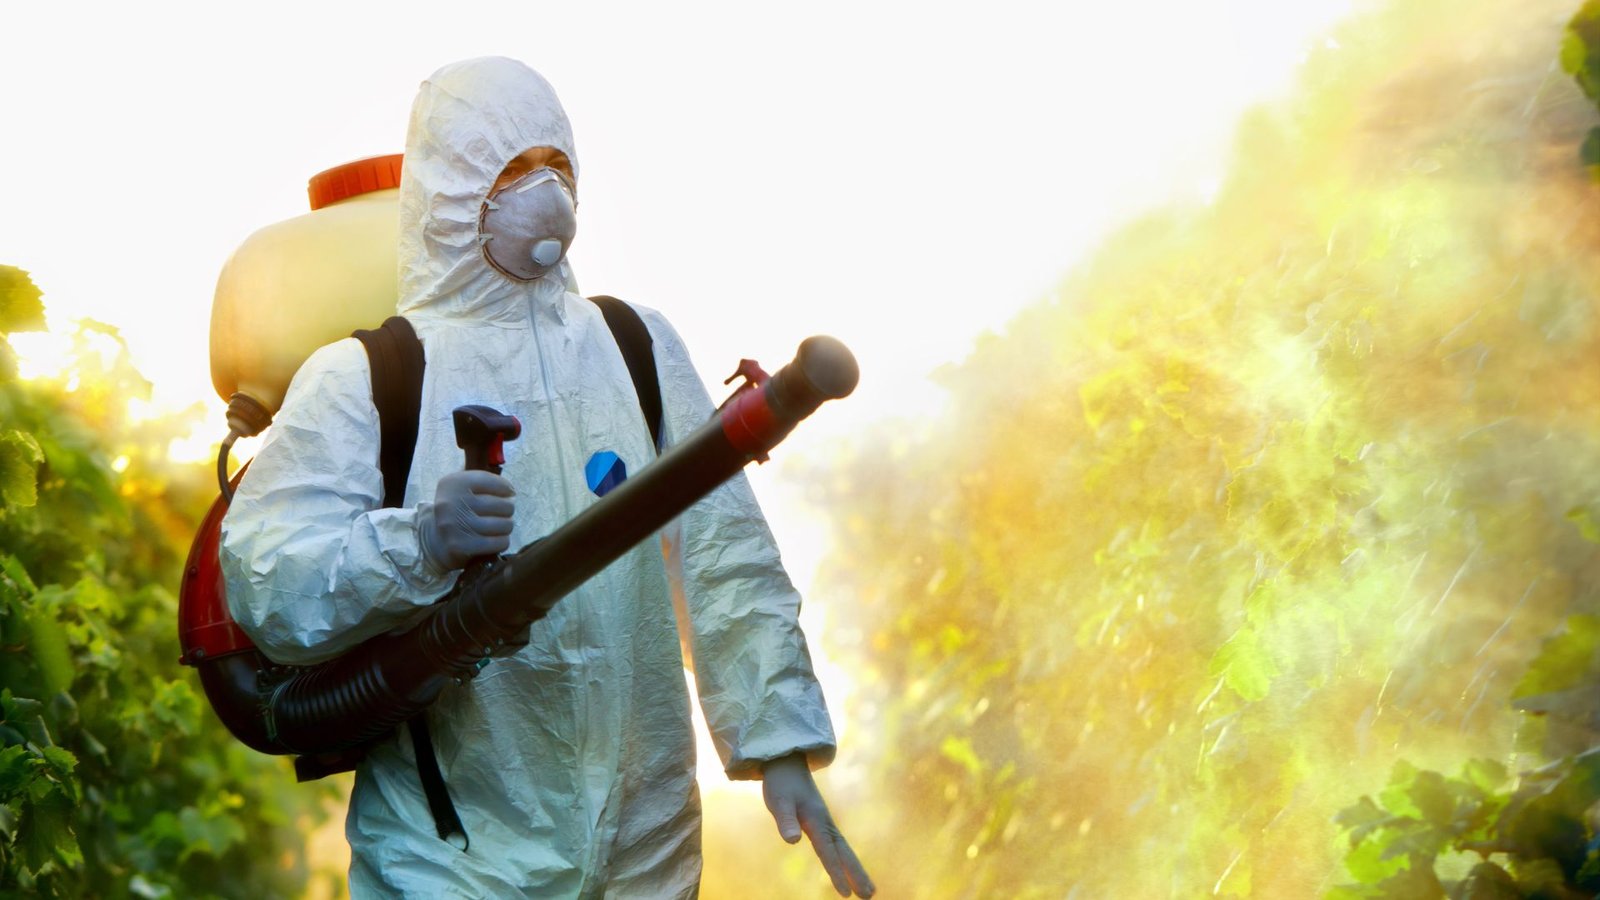 a pest control man in a hazmat suit spraying organic solutions to control pest